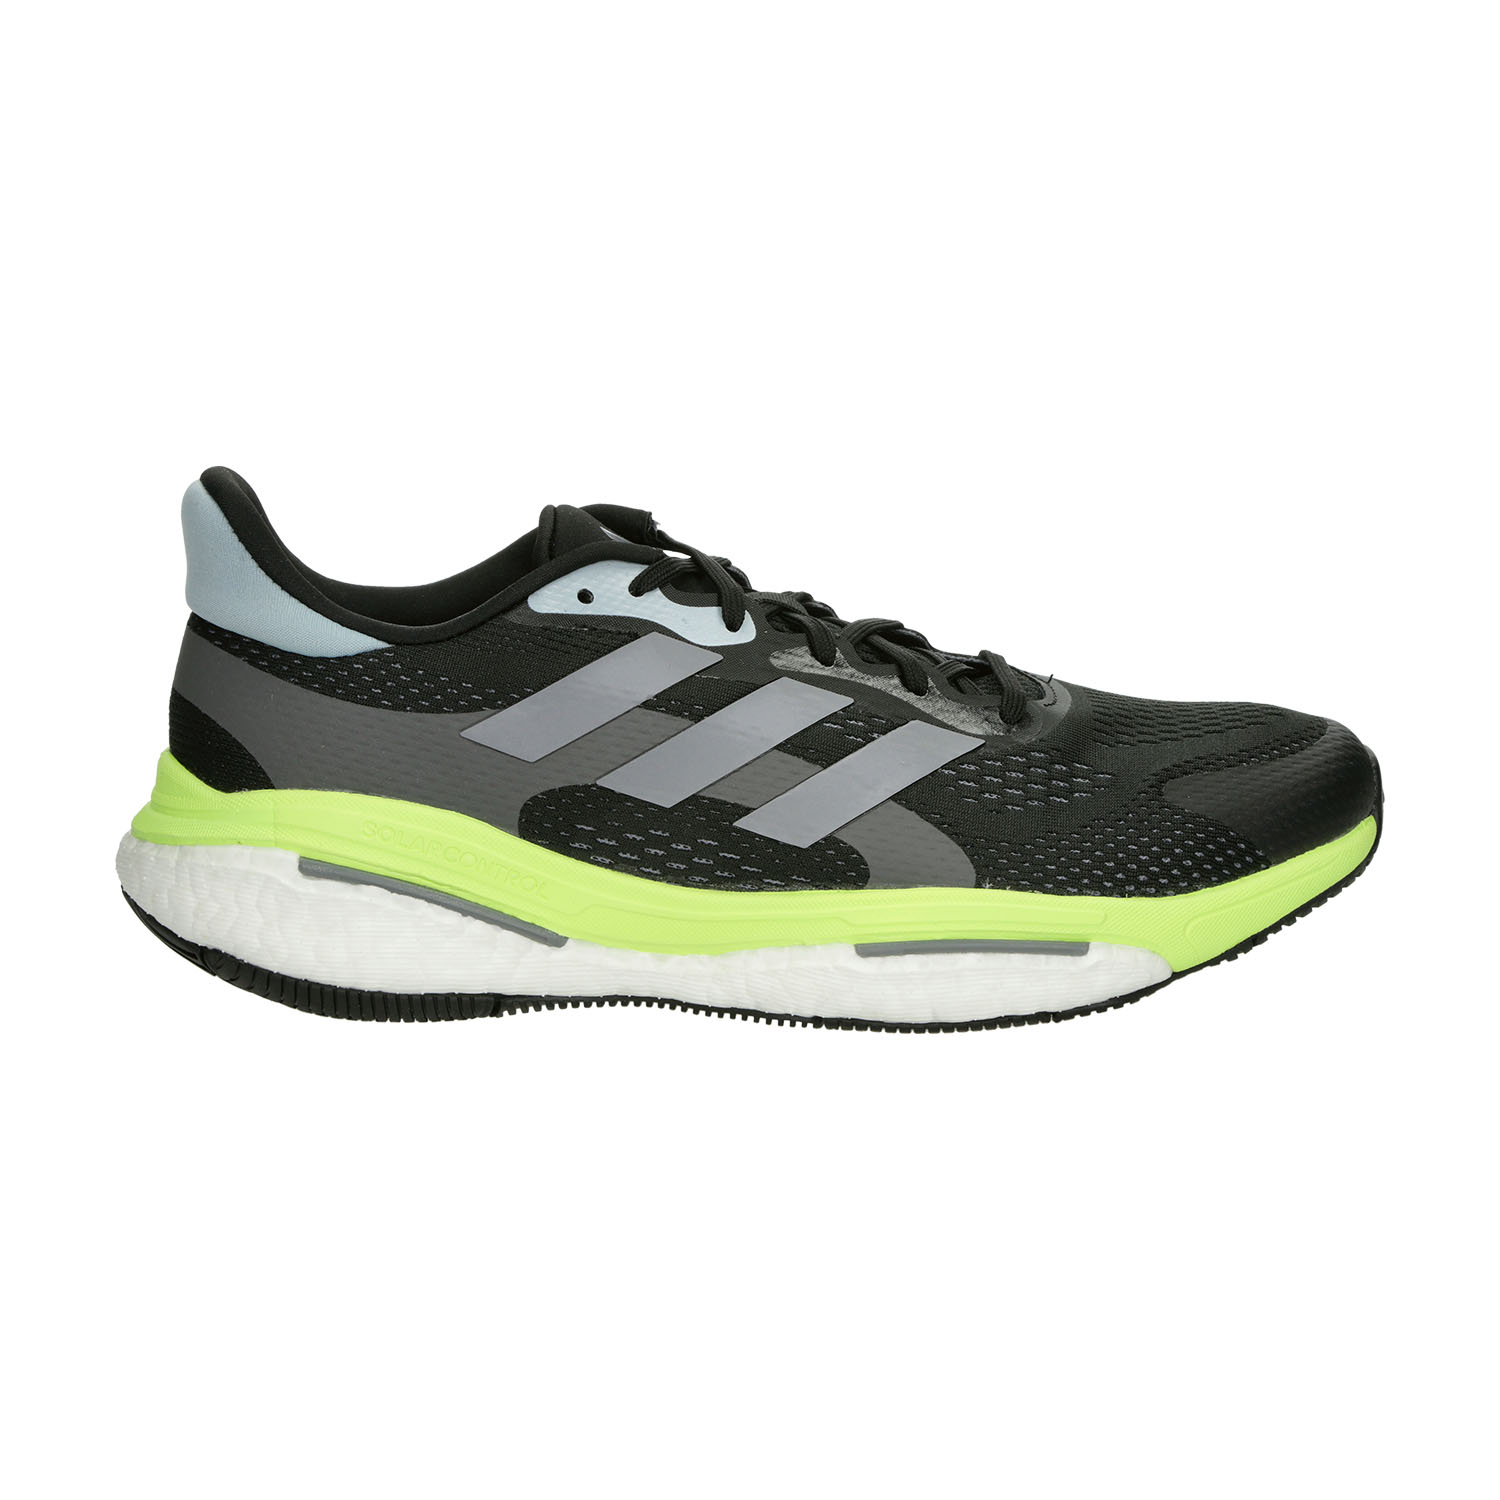 adidas Solarcontrol 2 Men's Running Shoes - Olive Strata